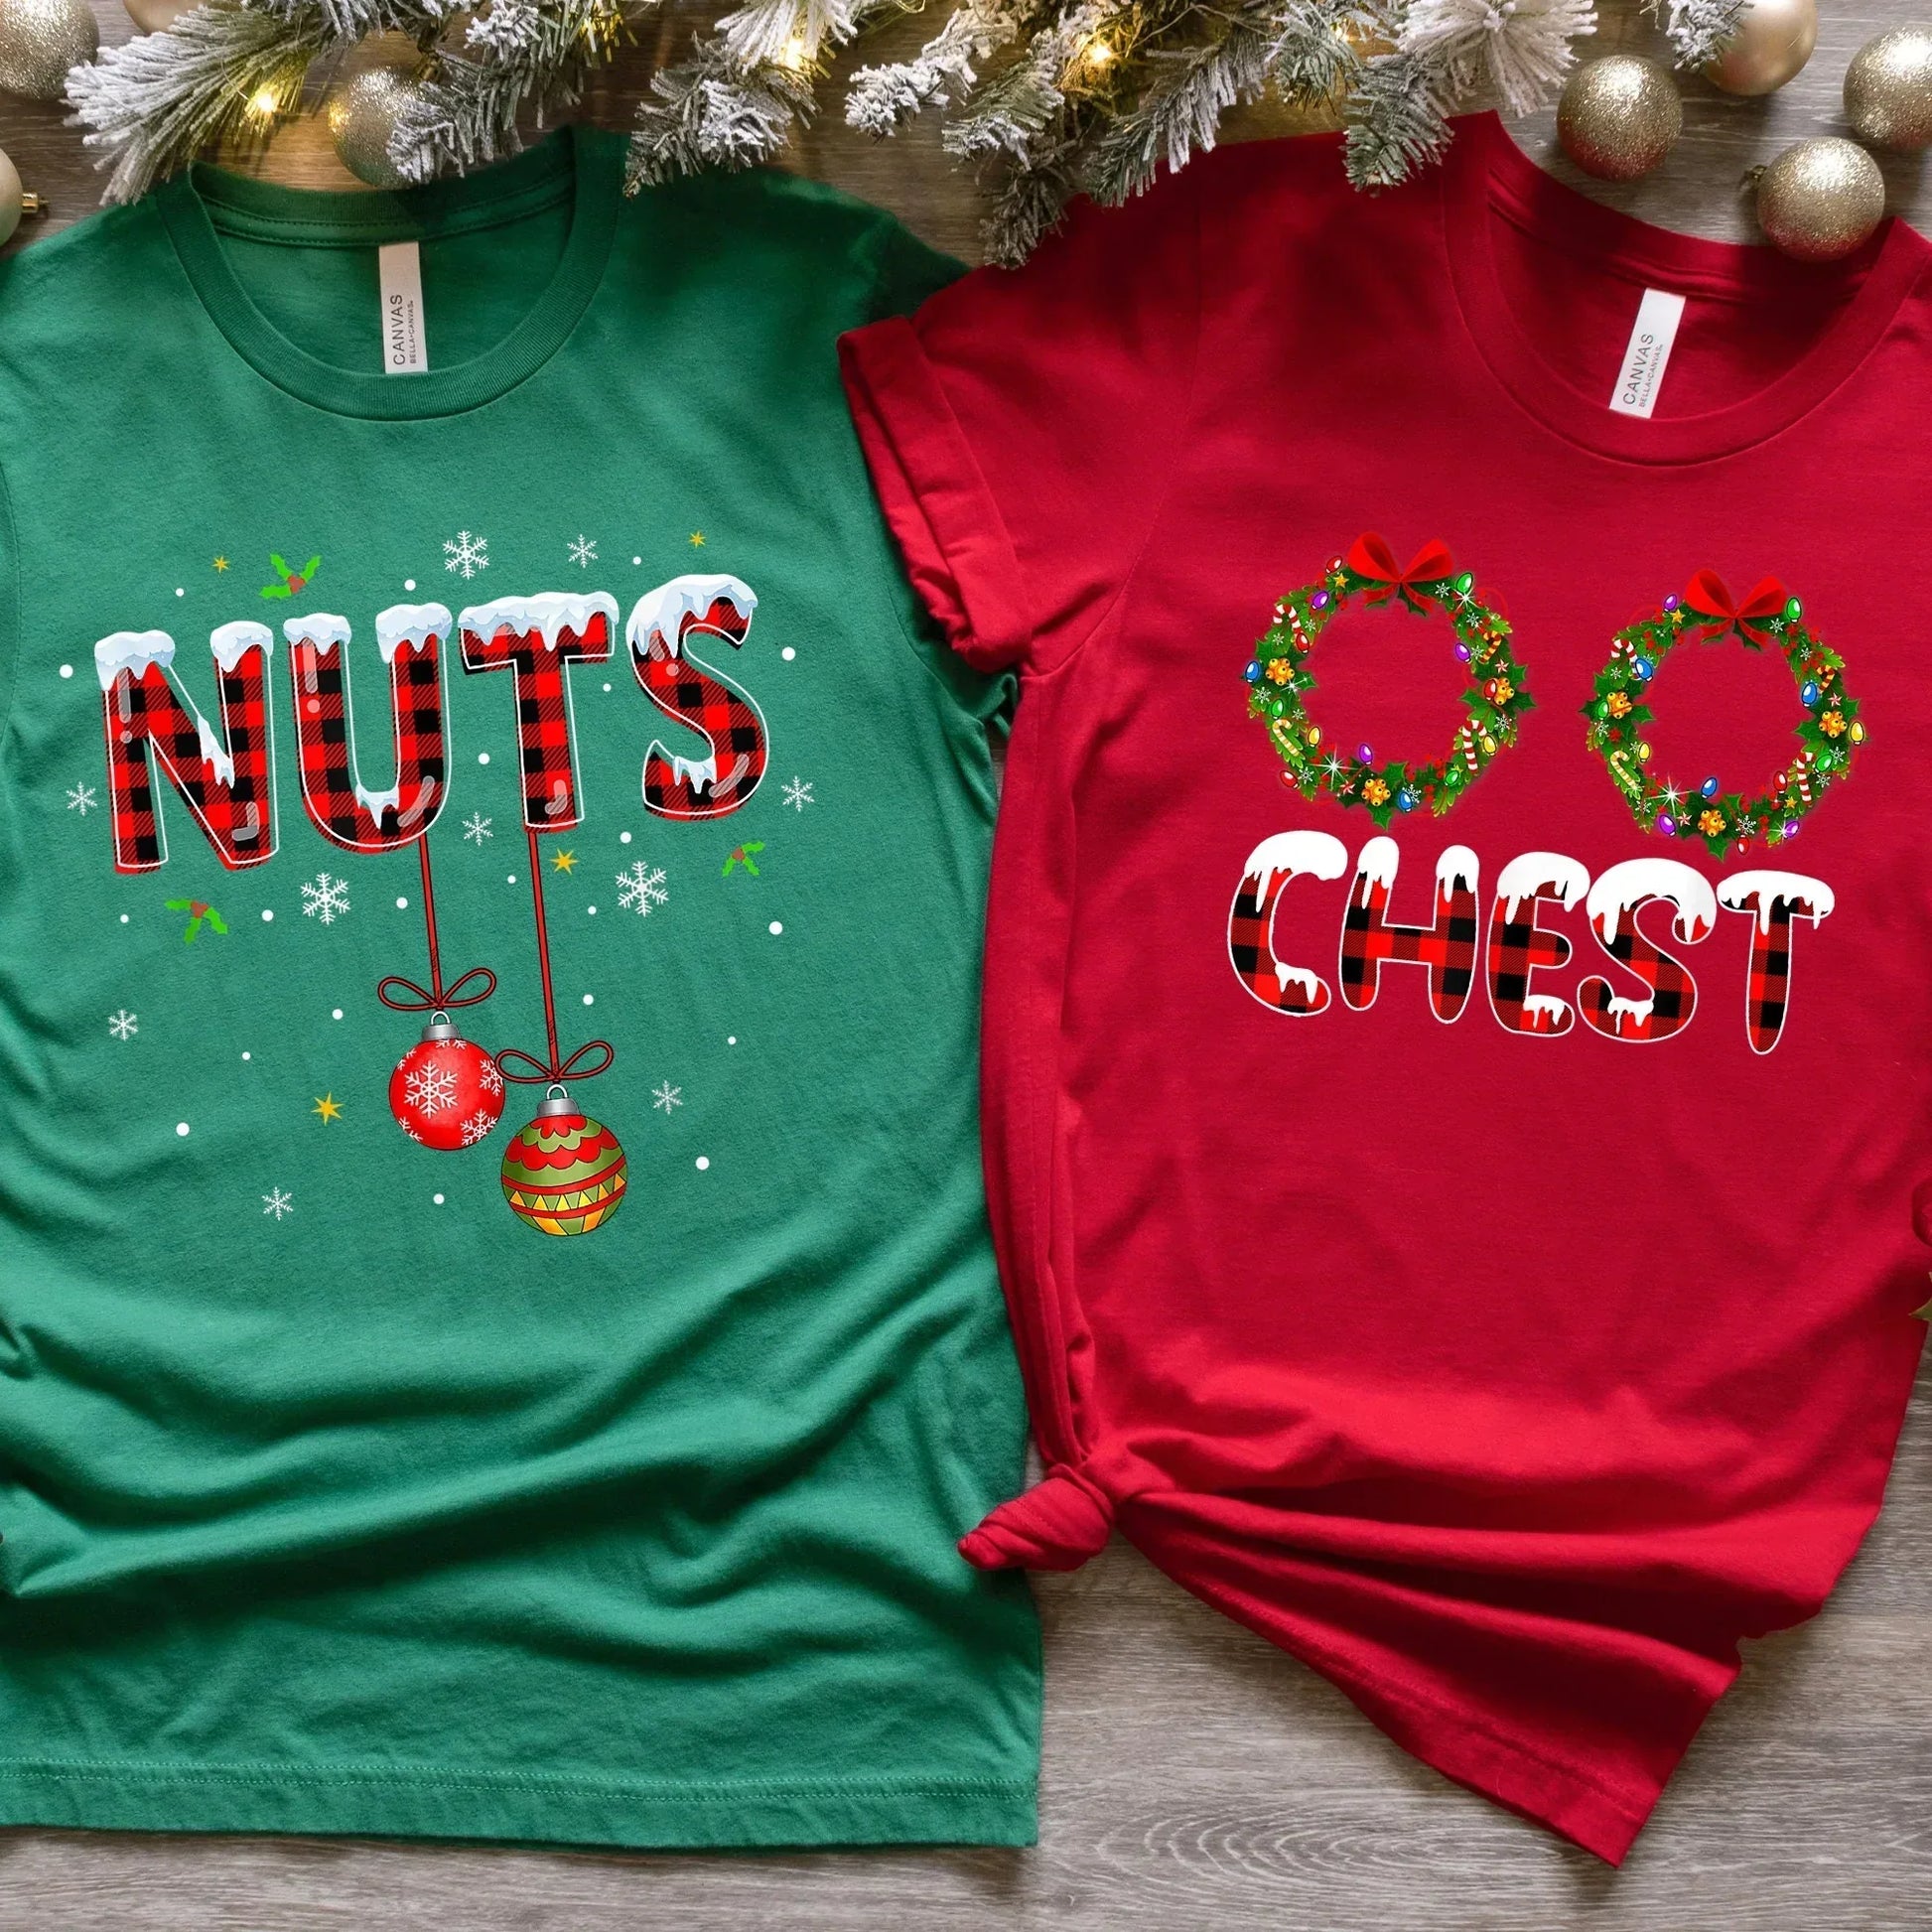 Christmas Family Shirts, Funny Christmas Couples T-shirt, Xmas Crew Tees, Chest Nuts Matching Family Tops, Gifts for him Christmas Shirts HMDesignStudioUS